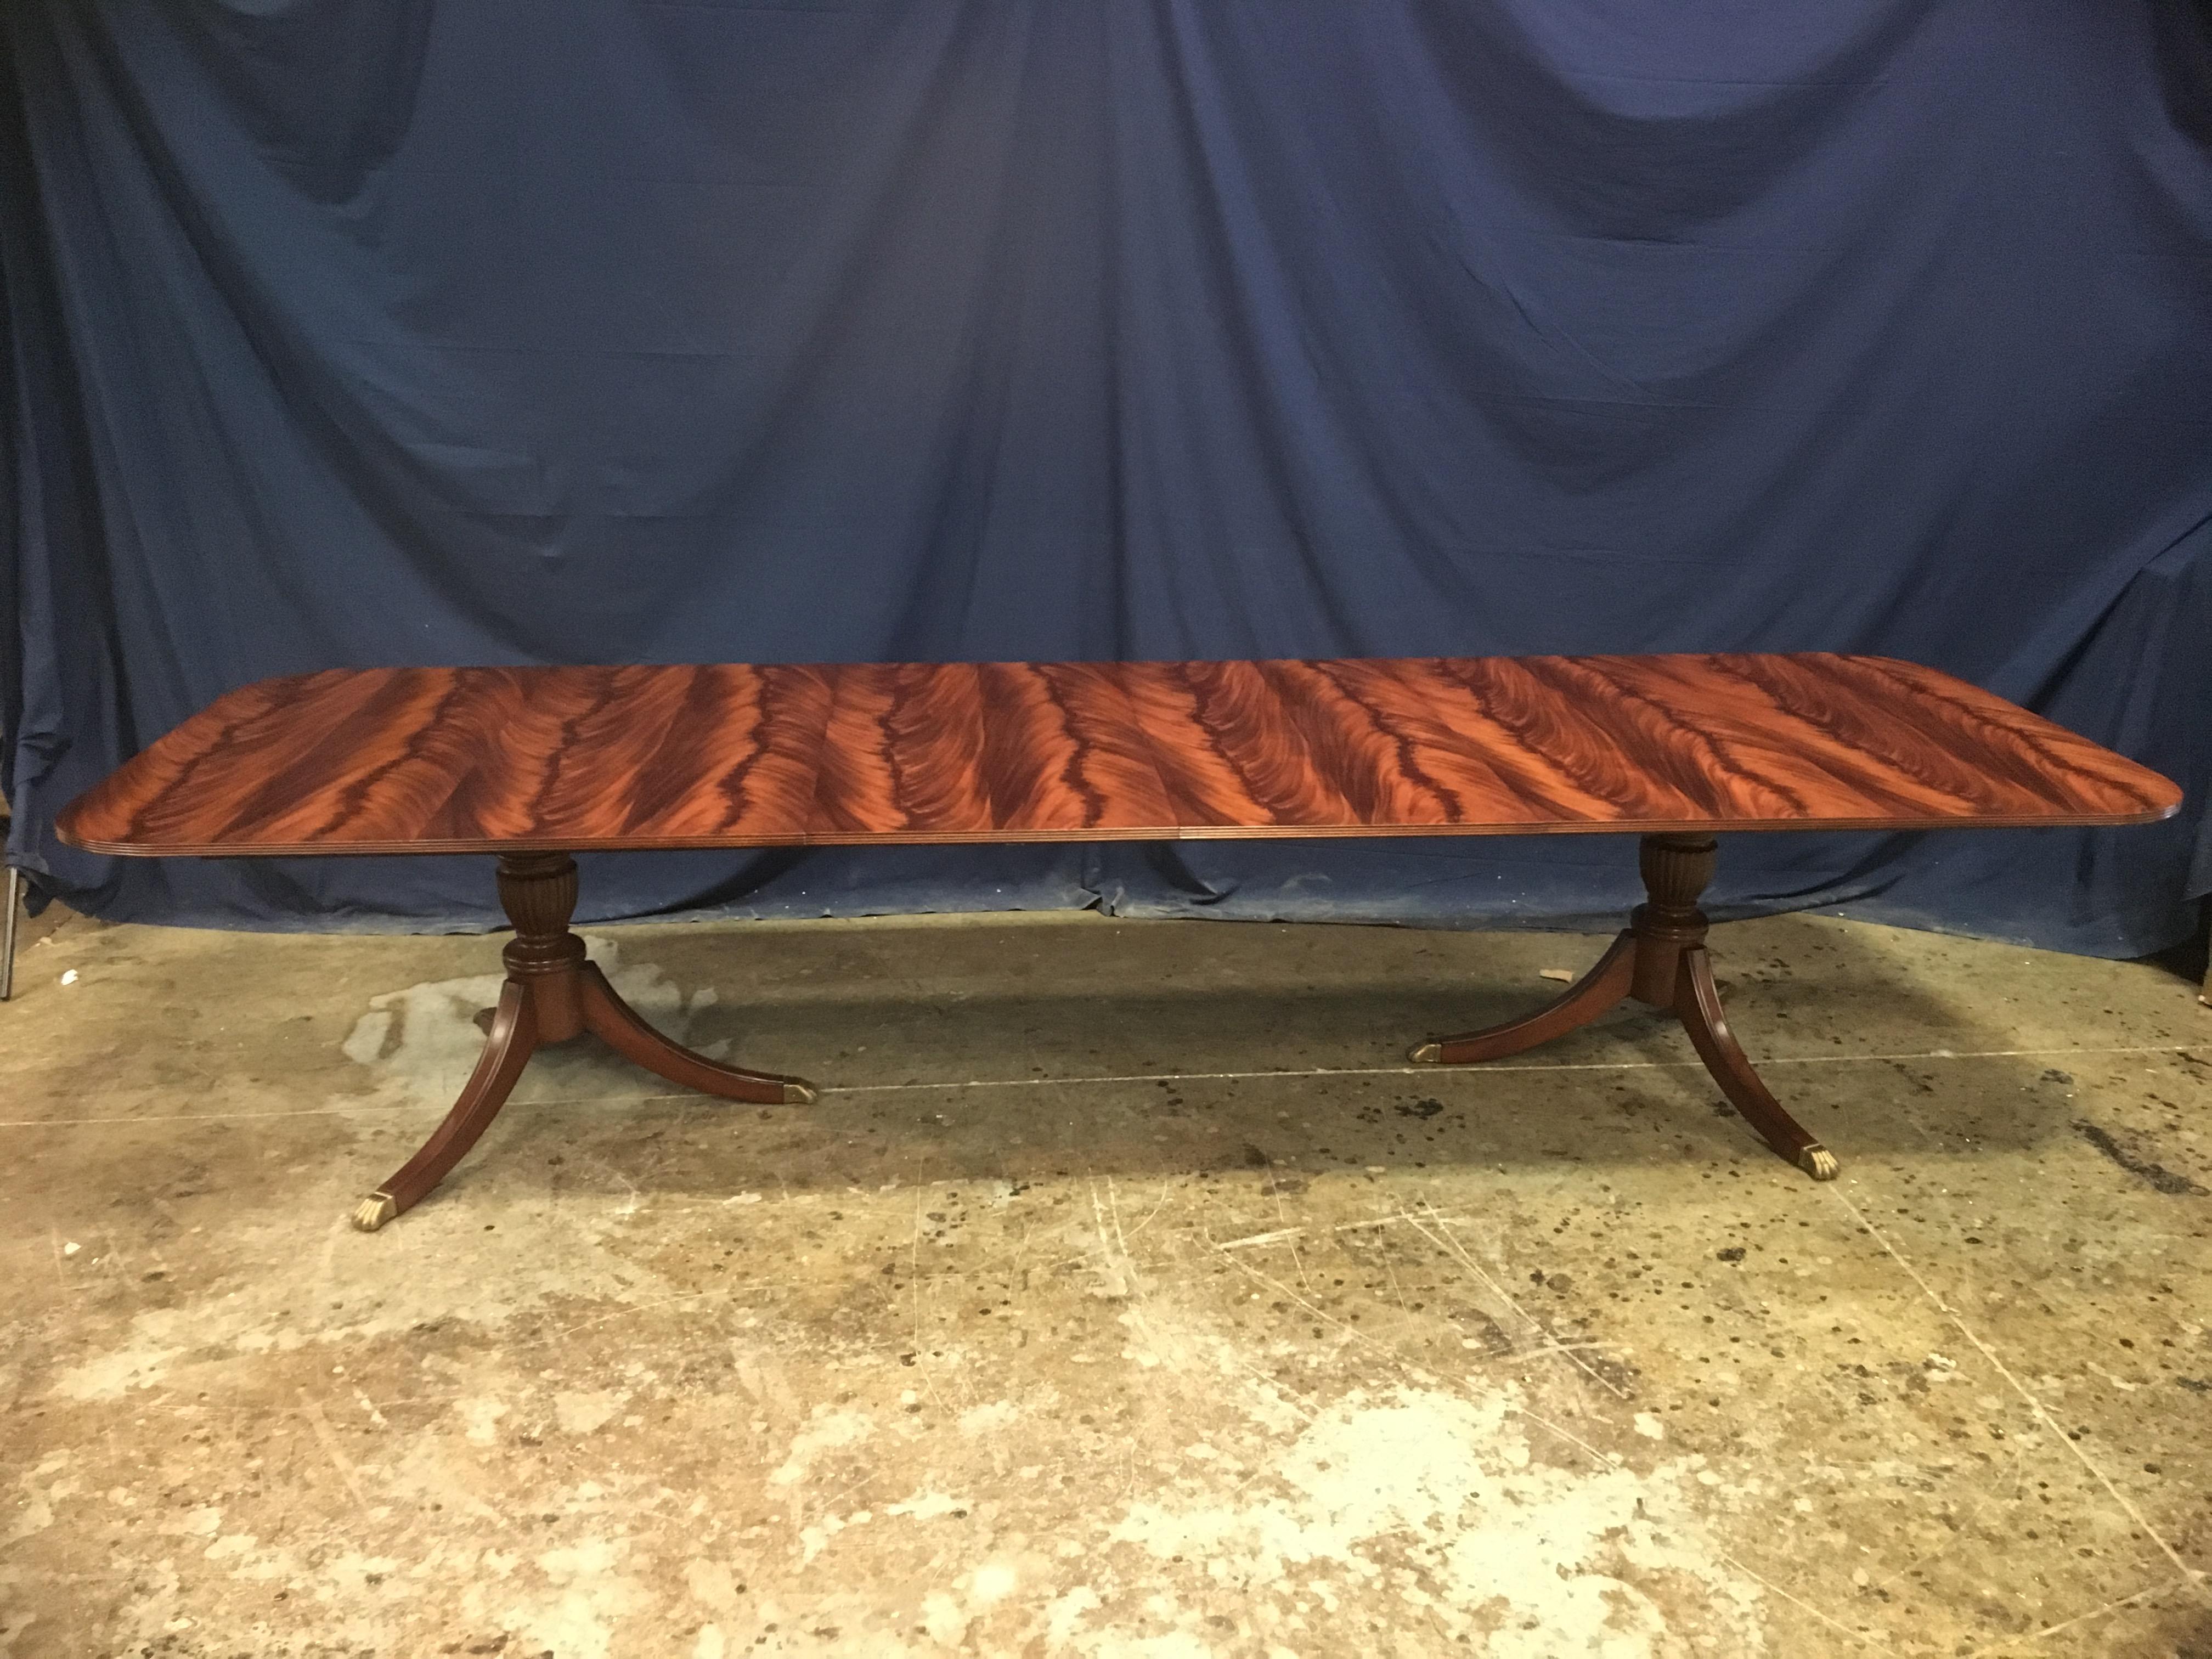 This is a made-to-order traditional mahogany dining table made in the Leighton Hall shop. It features a field of reverse slip-matched swirly crotch mahogany from West Africa. It has a hand rubbed and polished semi-gloss finish. The Sheraton-style